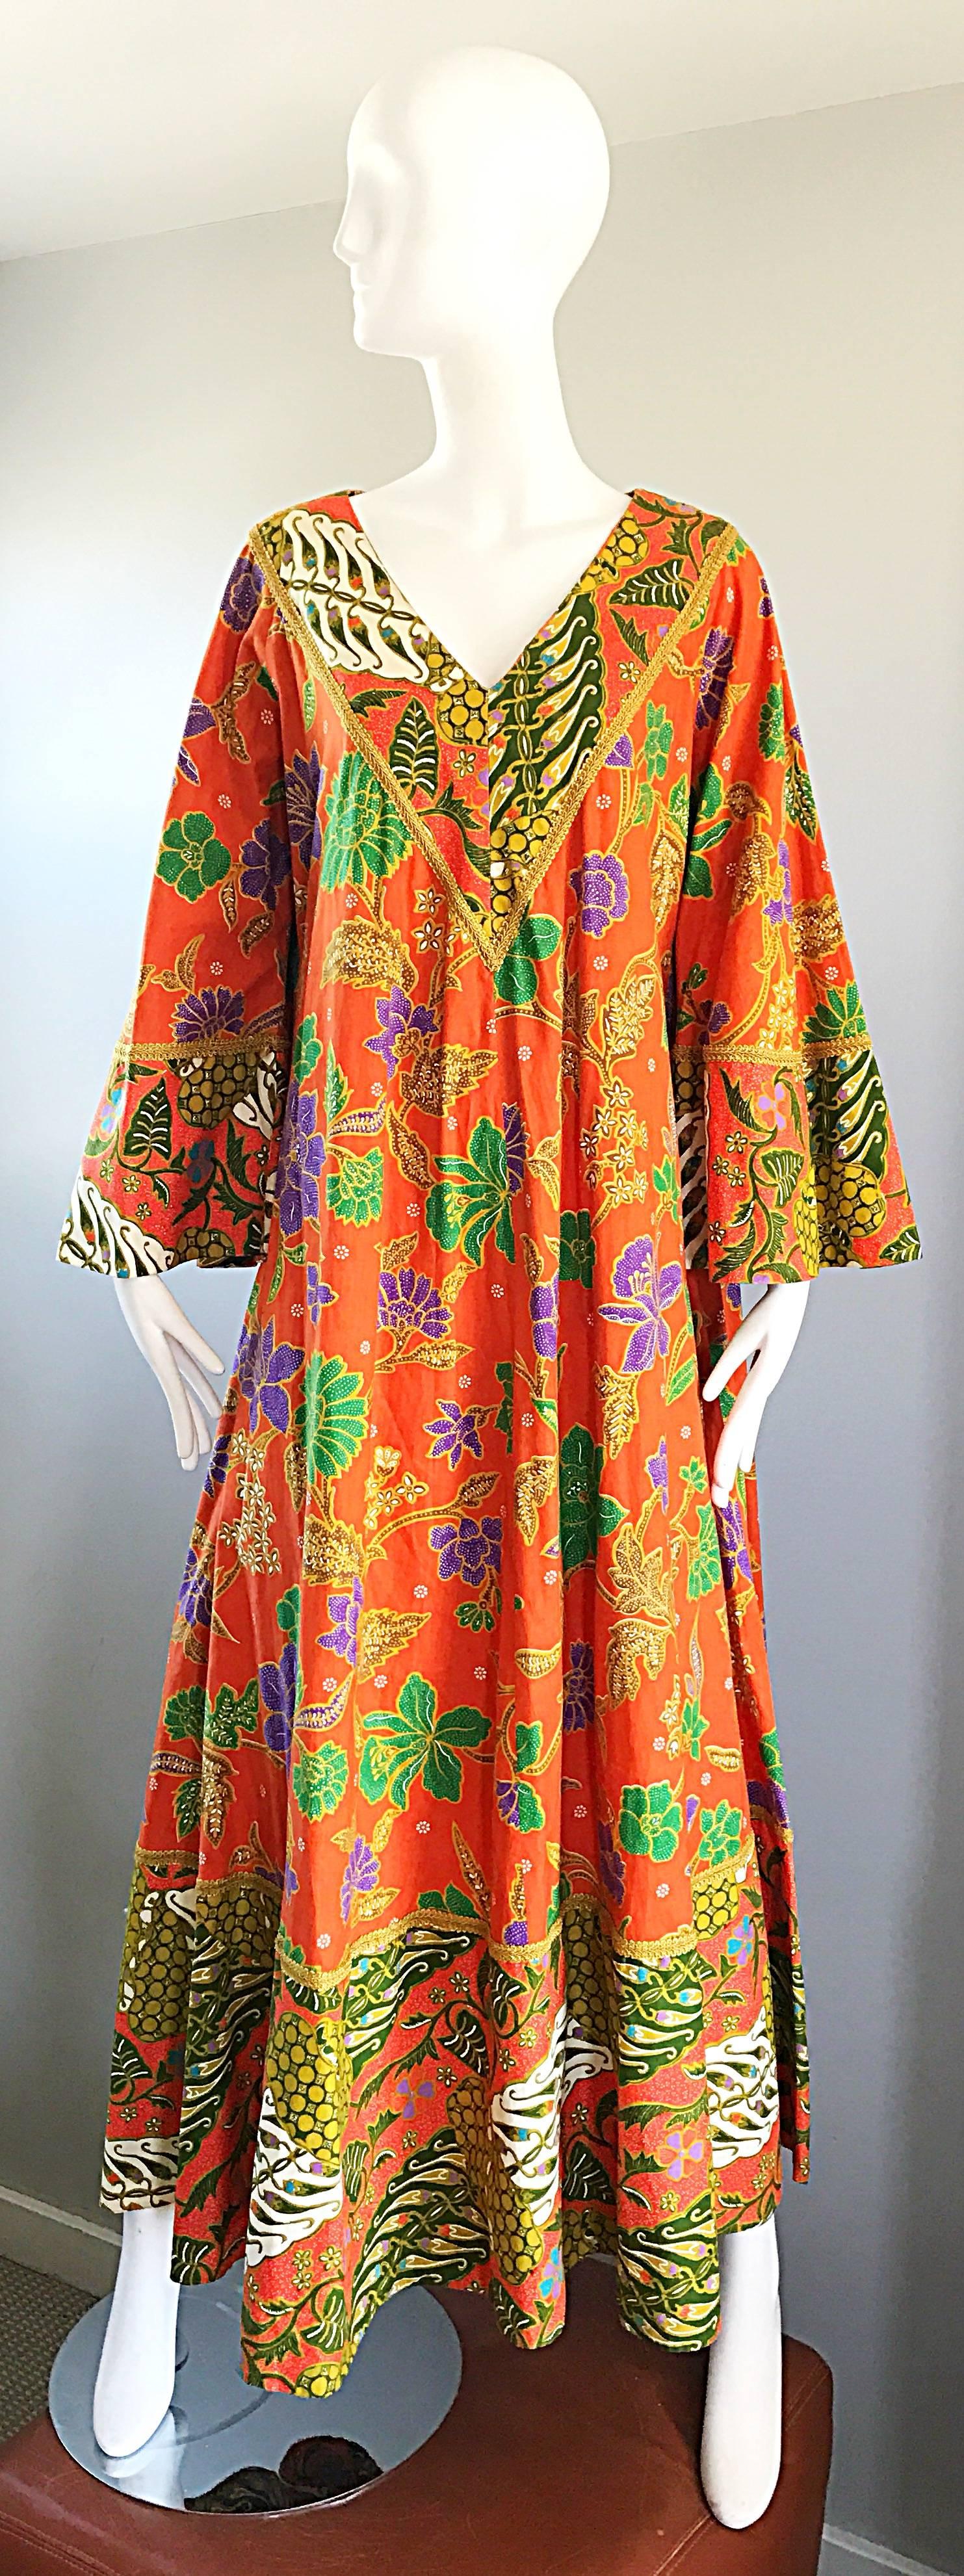 Incredible vintage 70s JAY MORELY for FERN VIOLETTE bright orange colorful oriental themes boho kaftan! Jay Morley was the lead fashion designer for all the major Hollywood movie studios from the 1950s - 1970s. These rare 70s 
Jay Morley pieces were